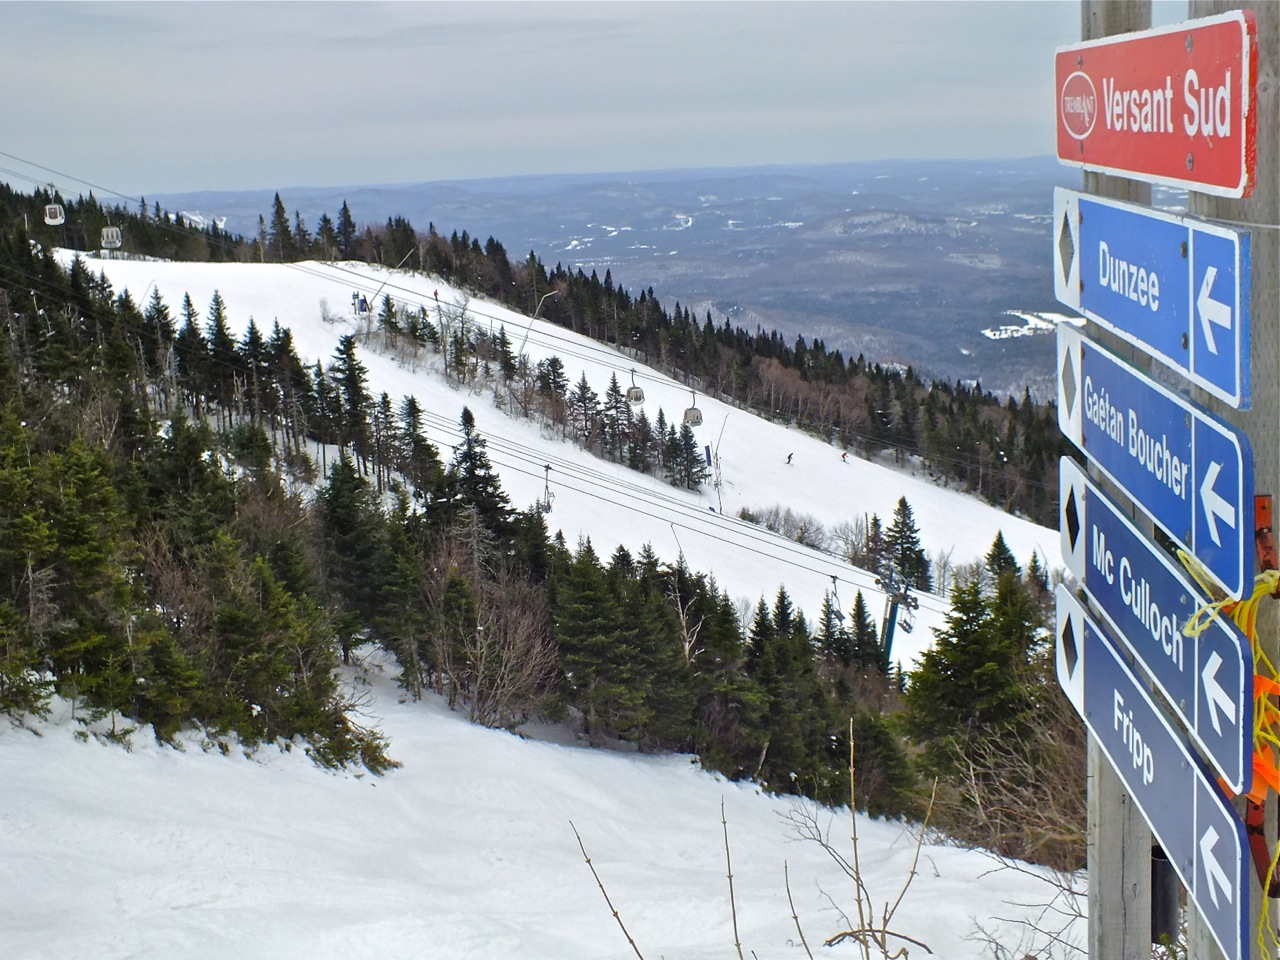 www.tremblant360.com Photo. All rights reserved.